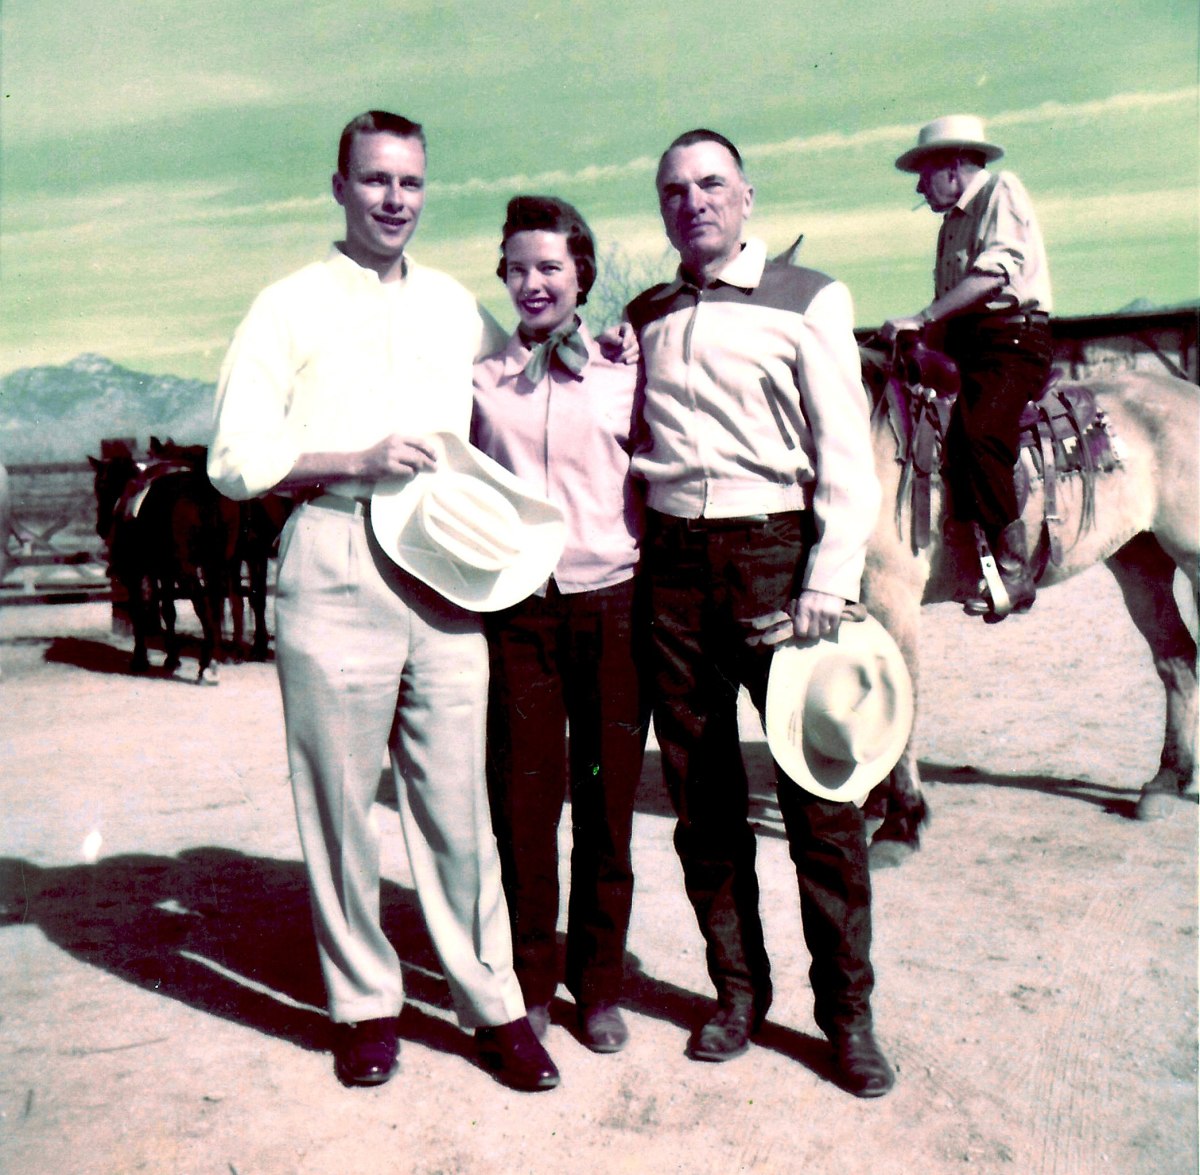 A family visits an Arizona dude ranch in 1956.